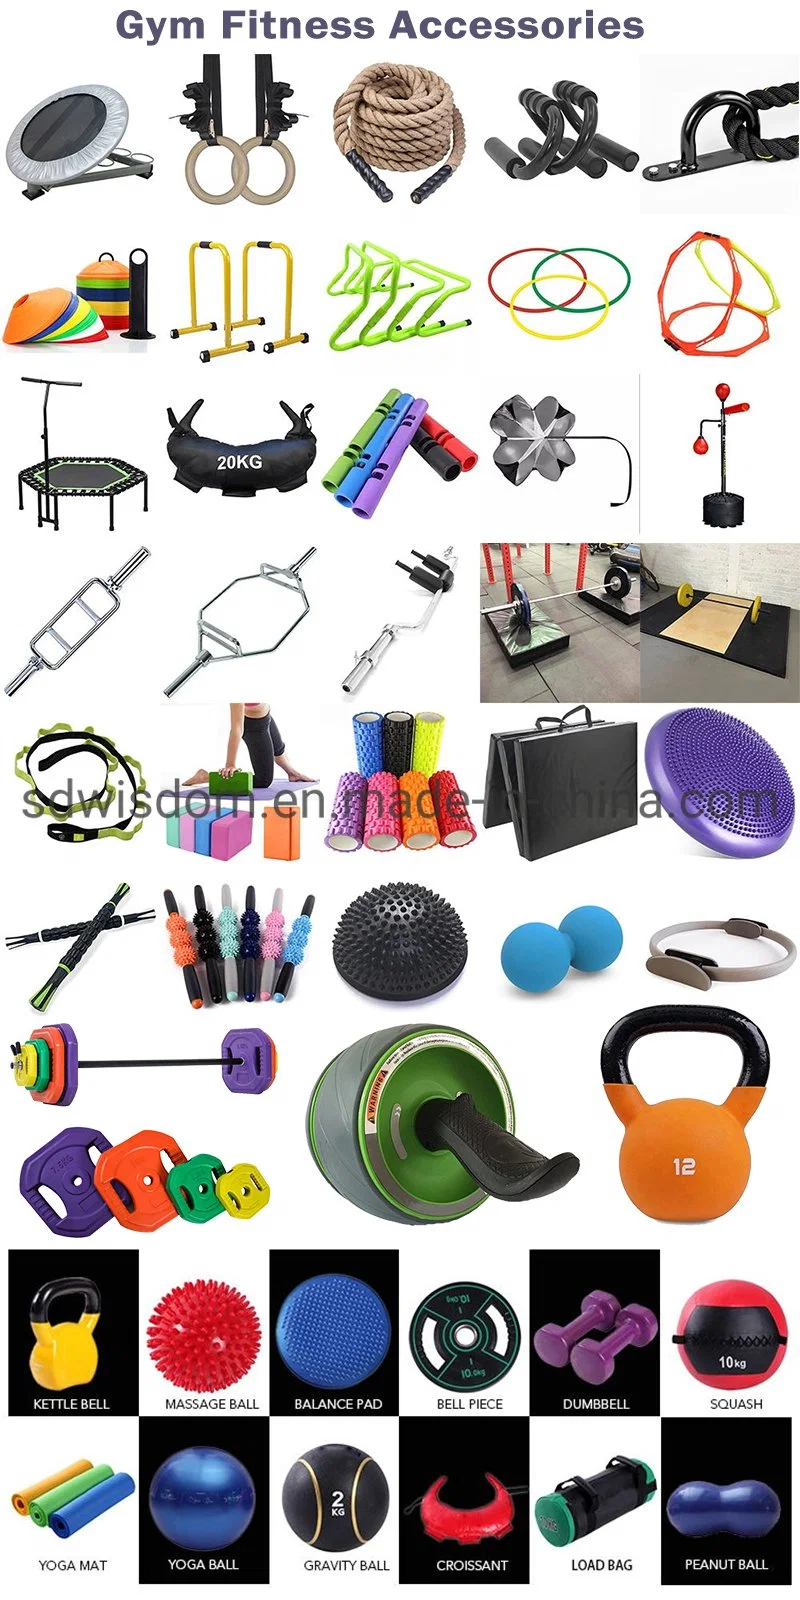 Good Quality Fashion Style Deadlift Fitness Barbell Bar Lock-Jaw Collar Fixed Barbell Plates for Professional Gym Club